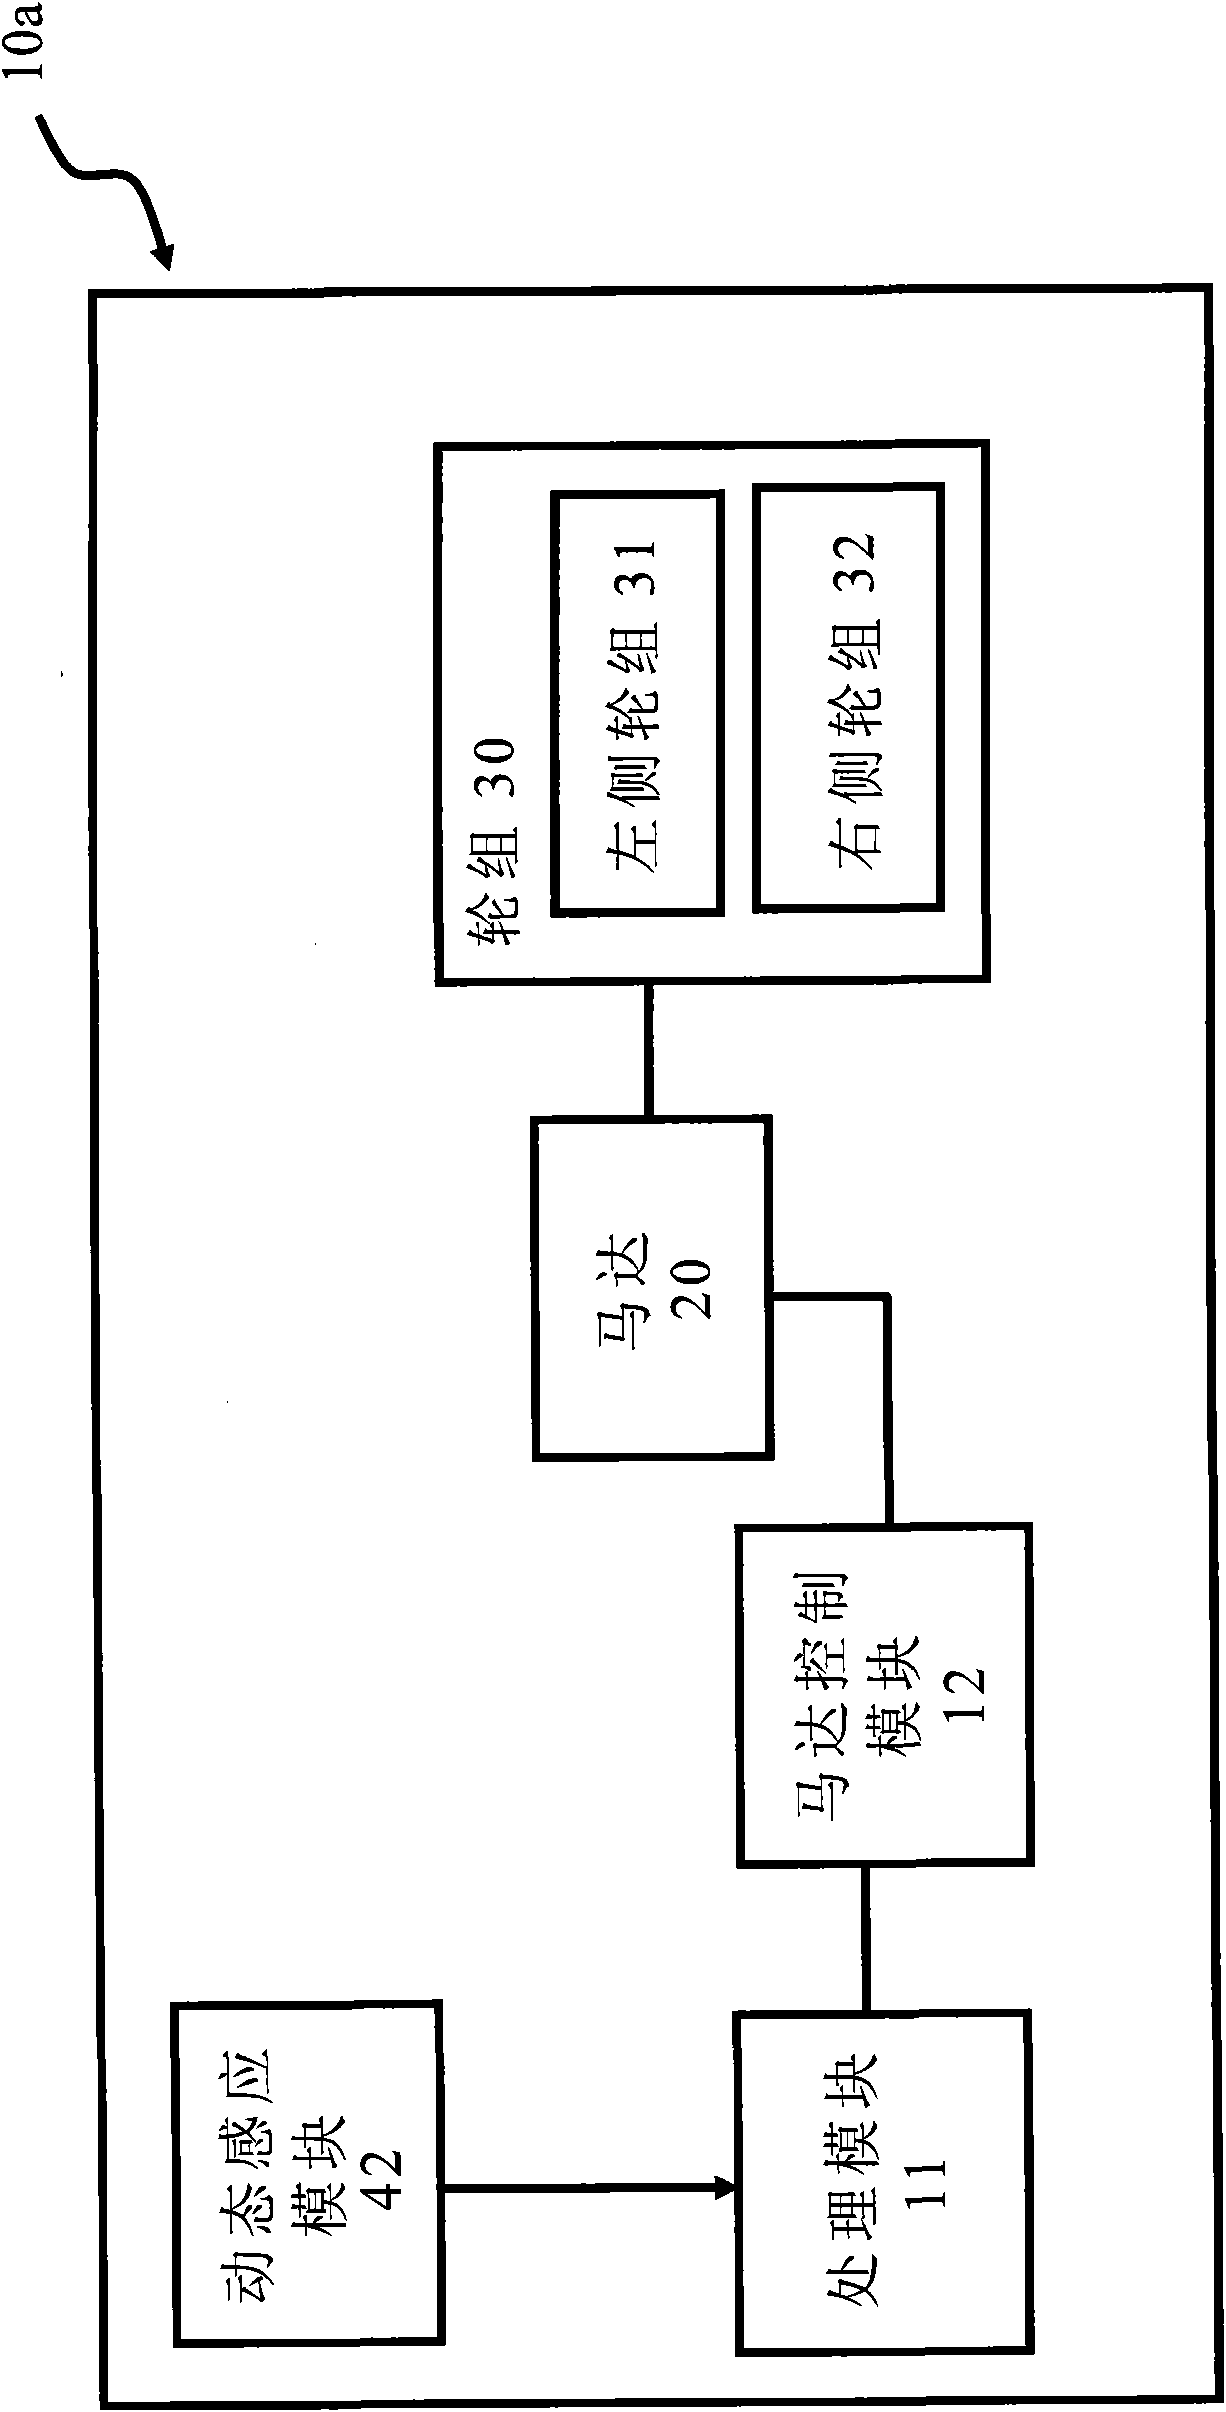 Autonomous electronic device and method of controlling motion of the autonomous electronic device thereof